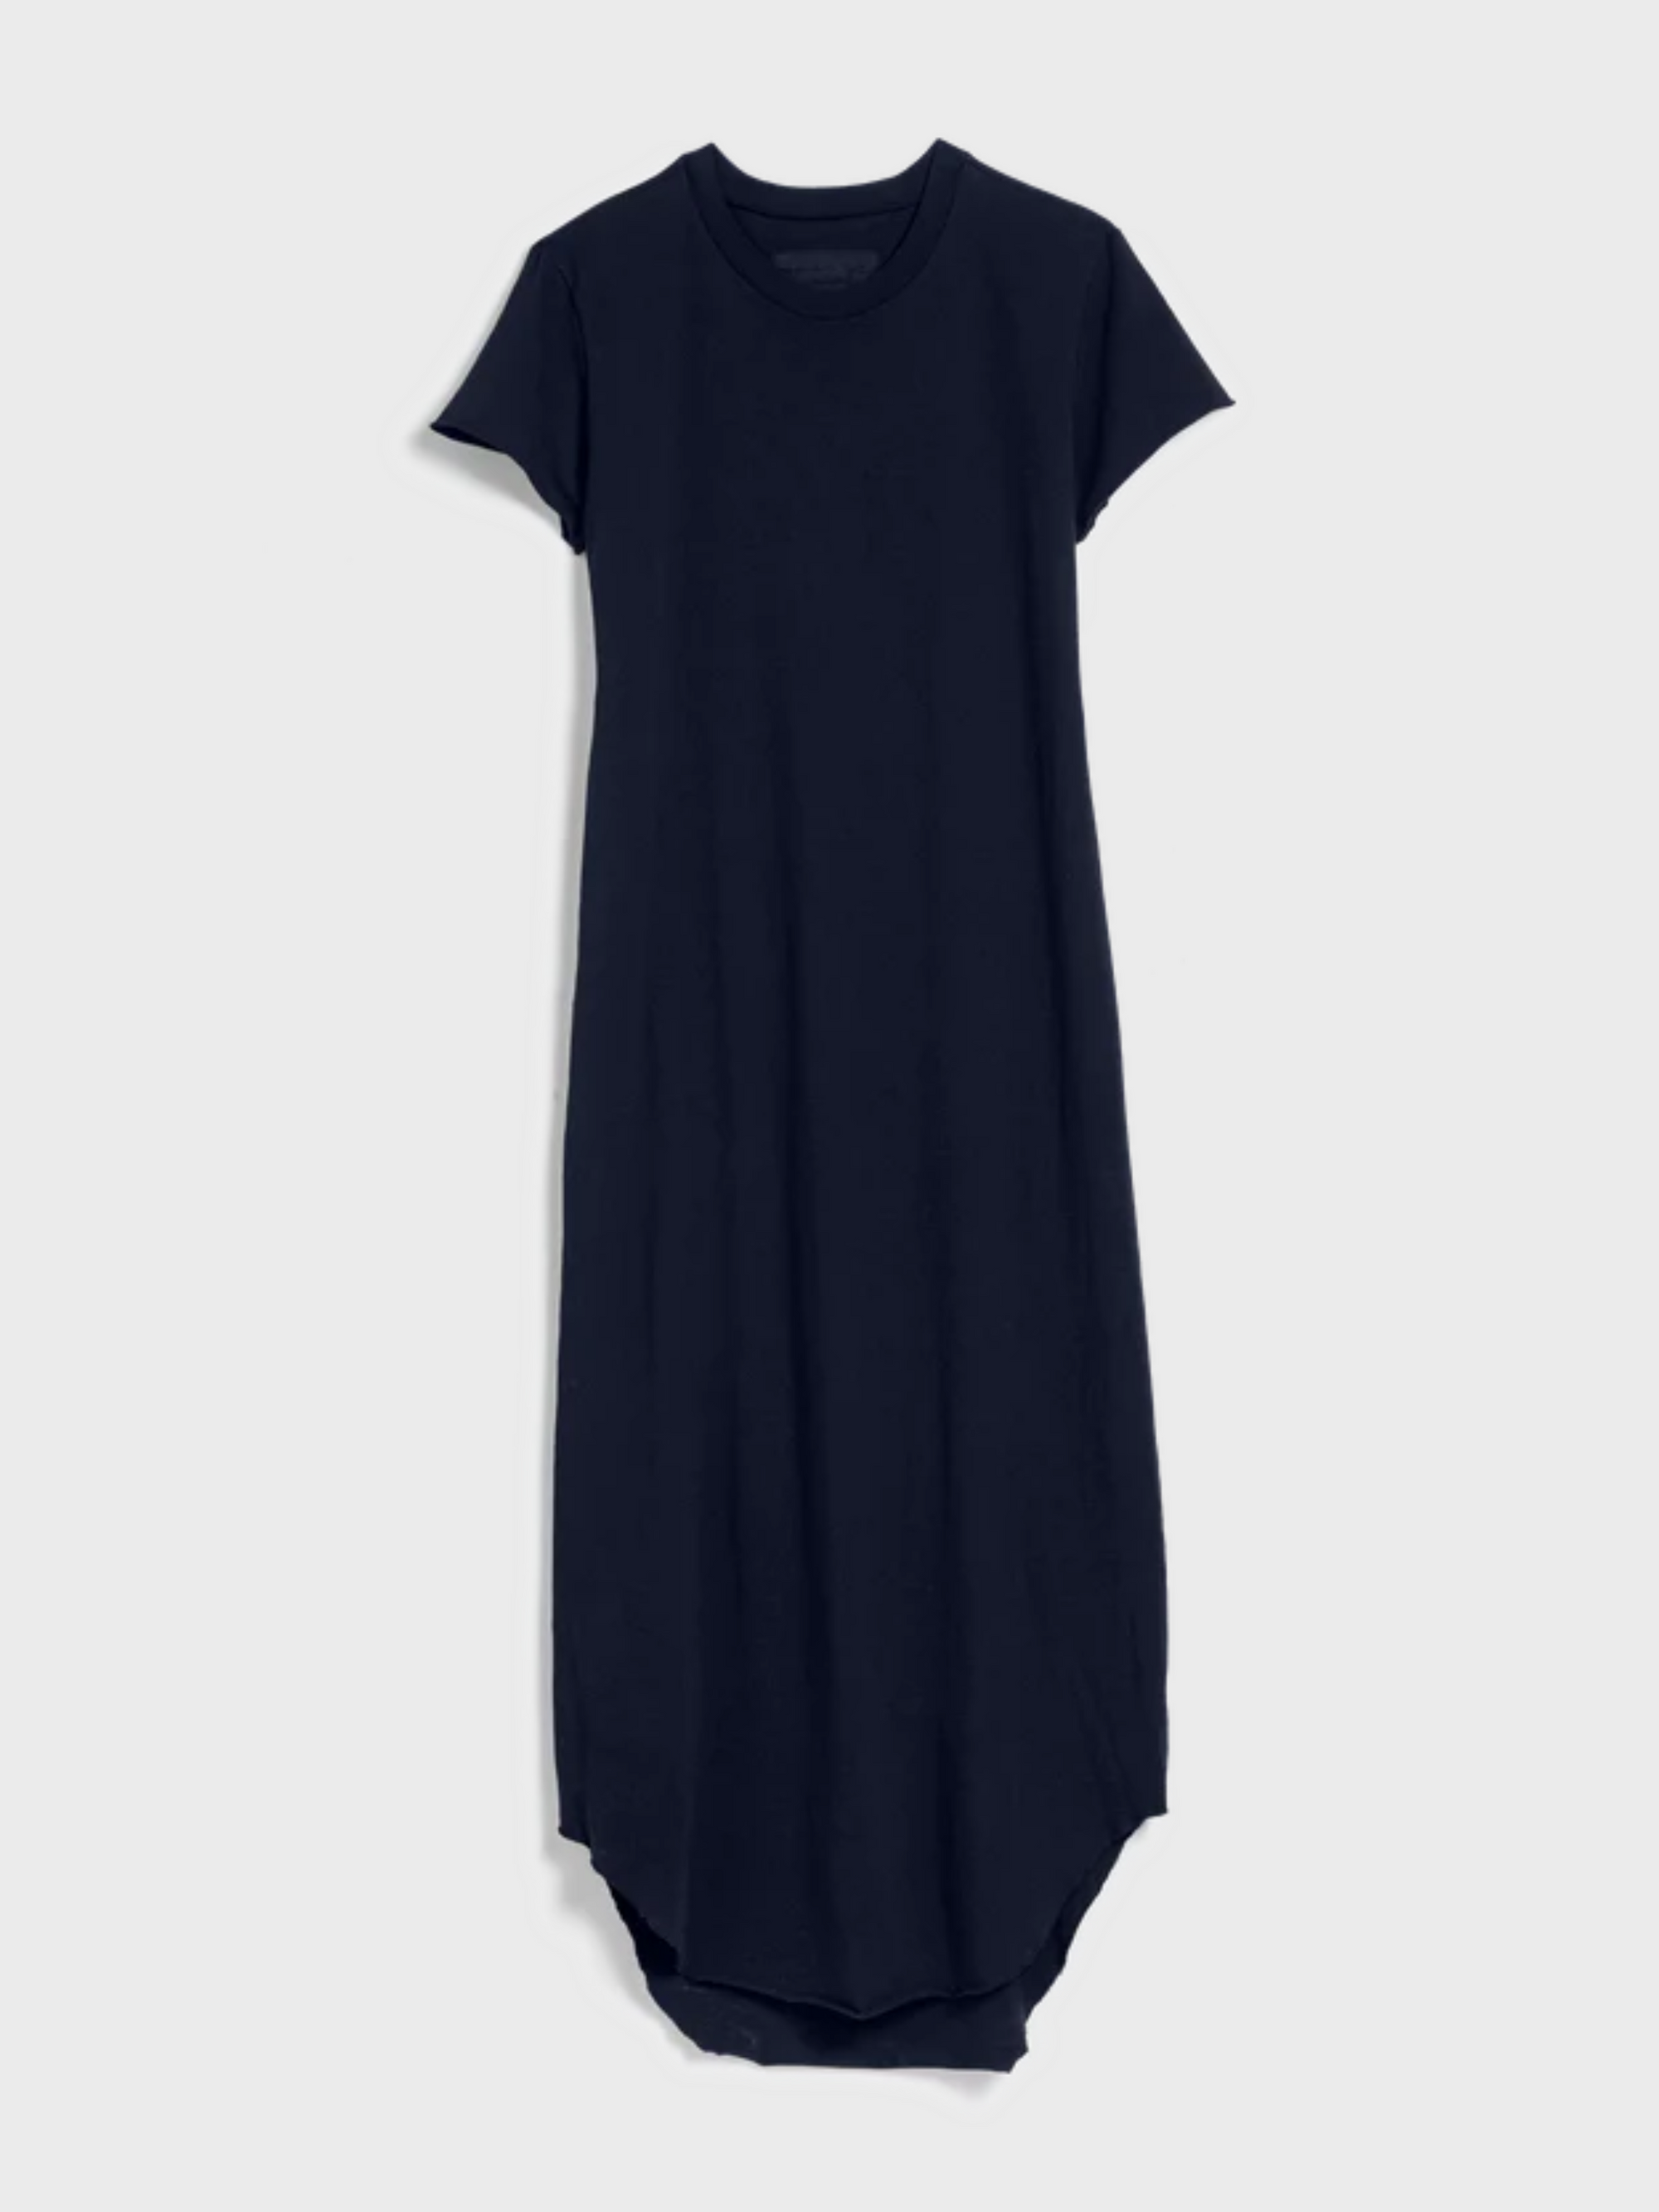 Frank & Eileen Harper Perfect Tee Dress- British Royal Navy-Dresses-West of Woodward Boutique-Vancouver-Canada